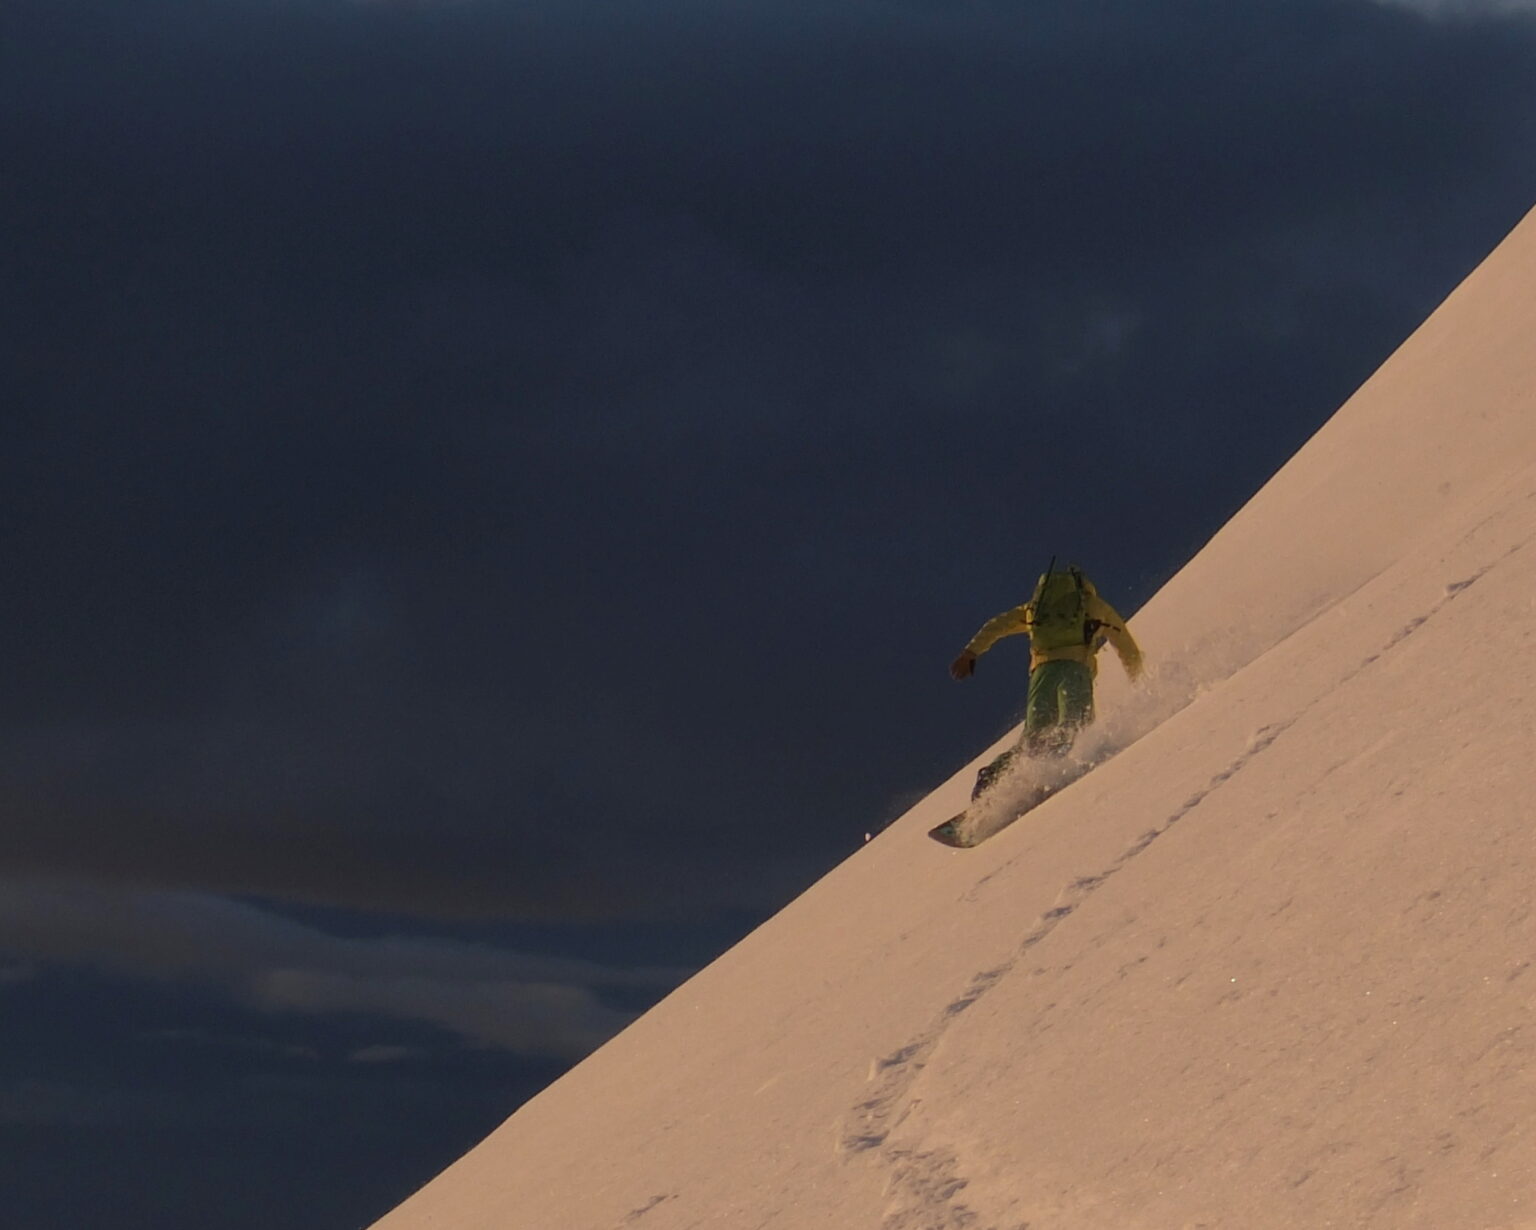 Making turns in the sunset alpenglow